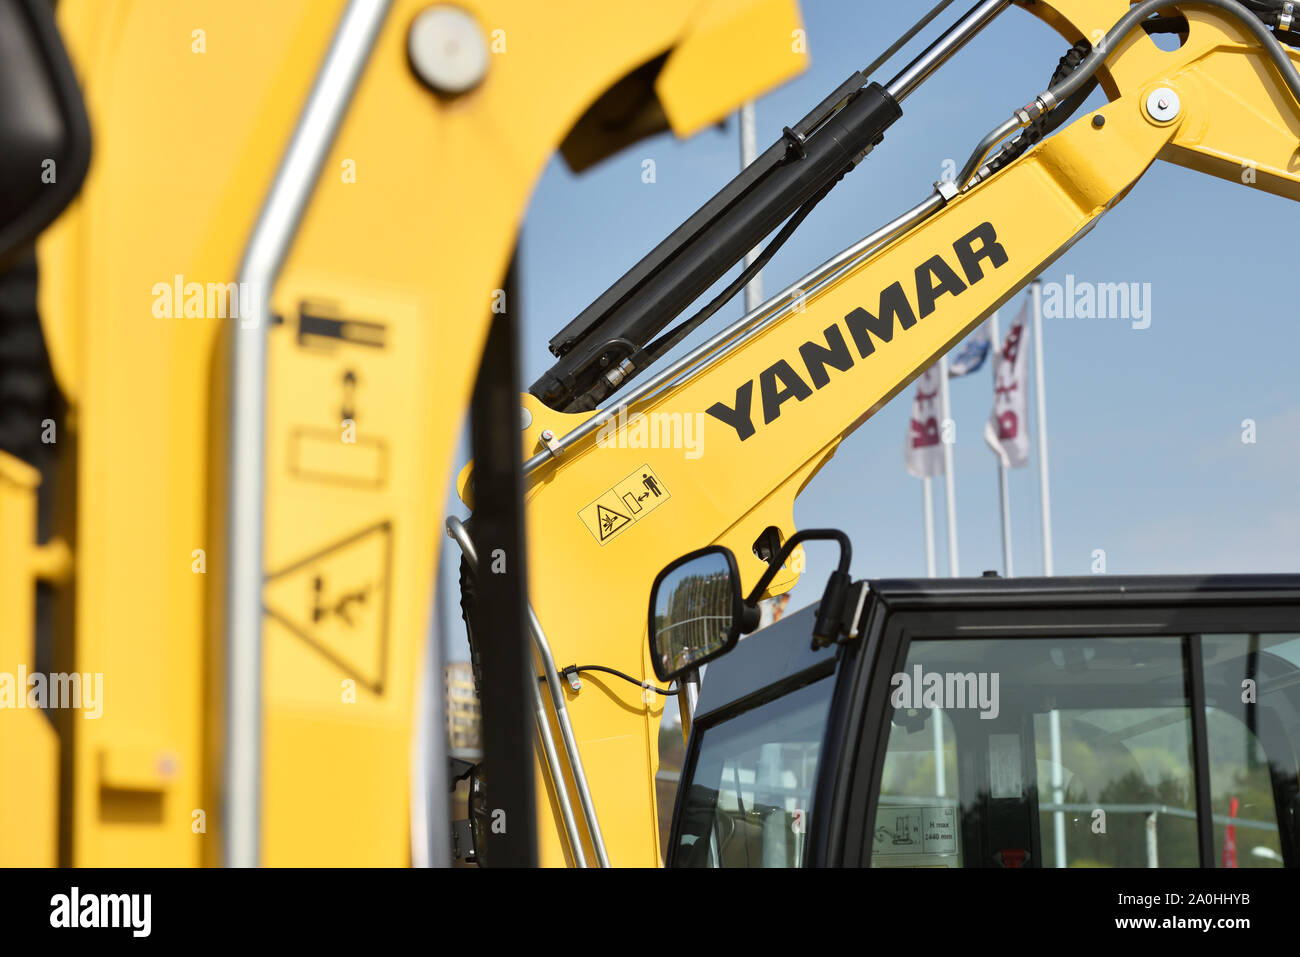 Vilnius, Lithuania - April 25: Yanmar excavator and logo on April 25, 2019 in Vilnius Lithuania. Yanmar is a Japanese company involved in the manufact Stock Photo